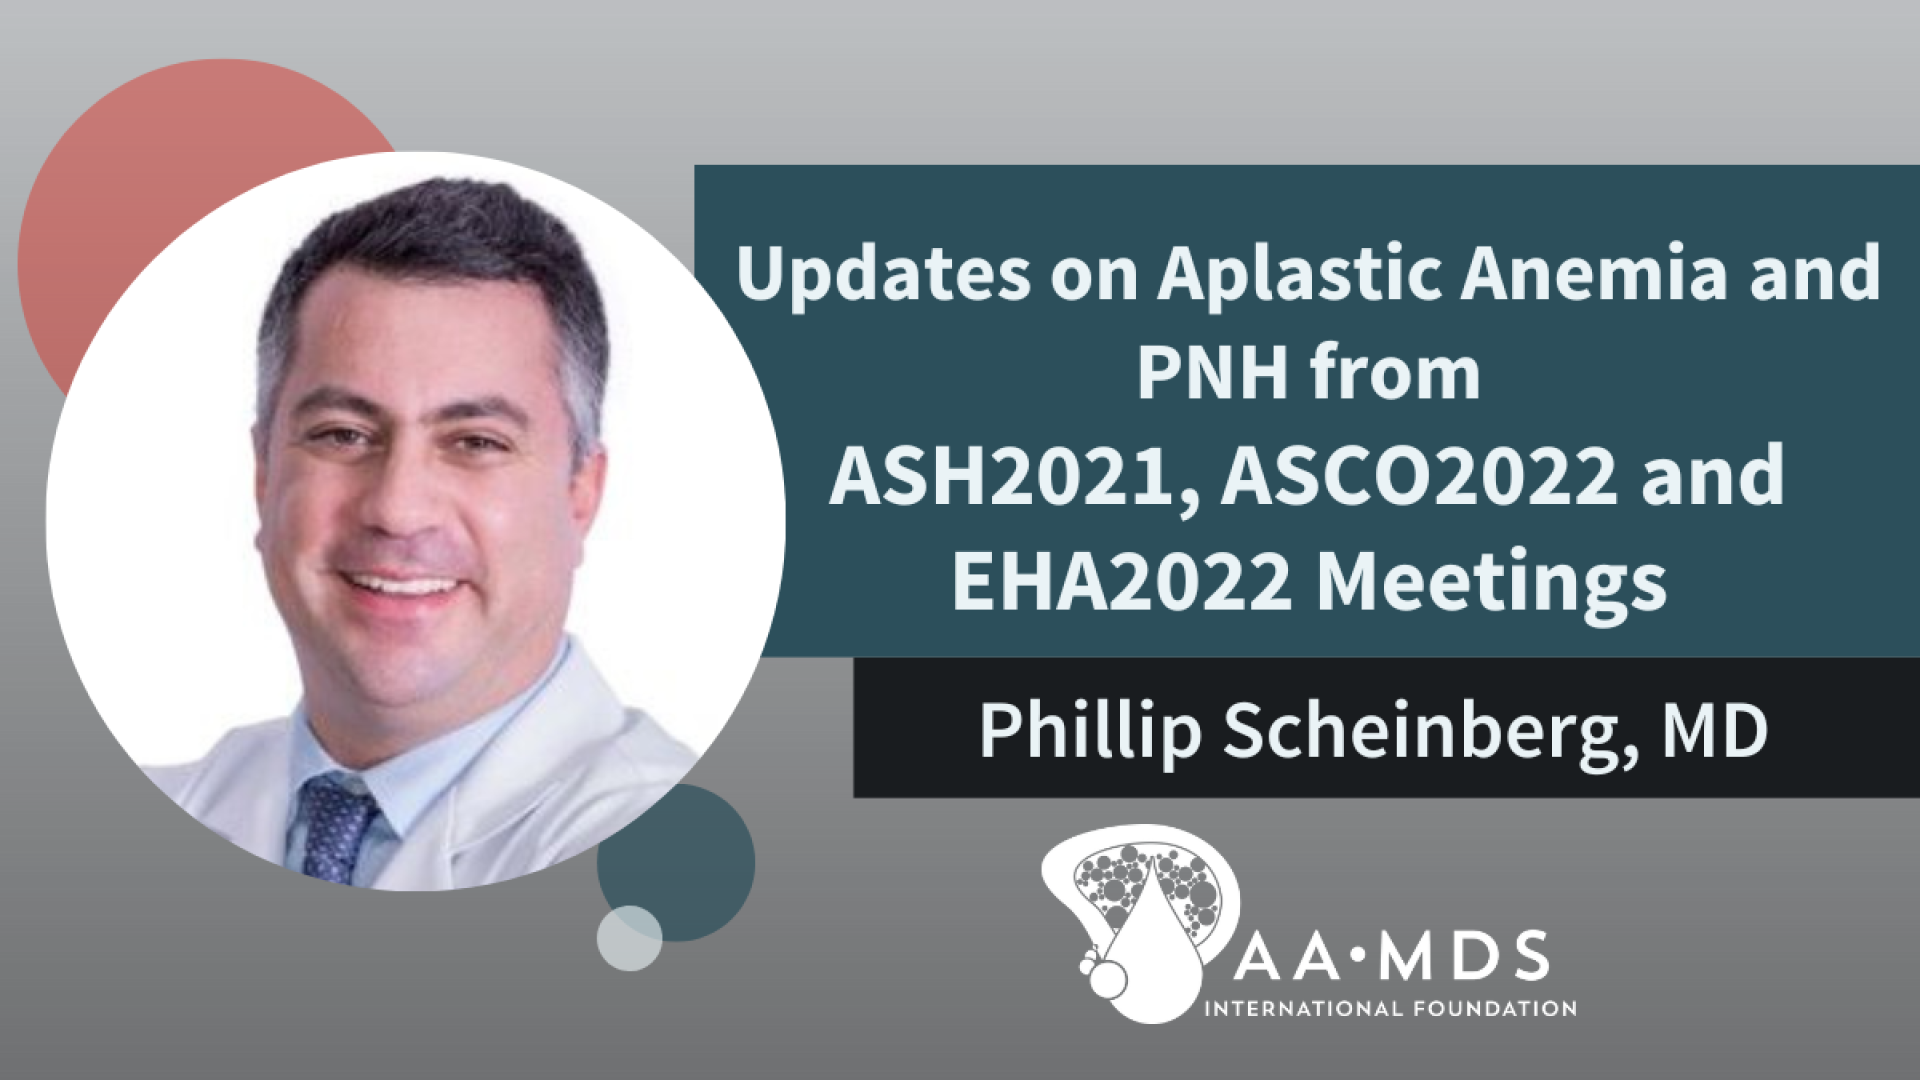 Updates from medical meetings about aplastic anemia and PNH, from ASH 2021, ASCO 2022, and EHA 2022